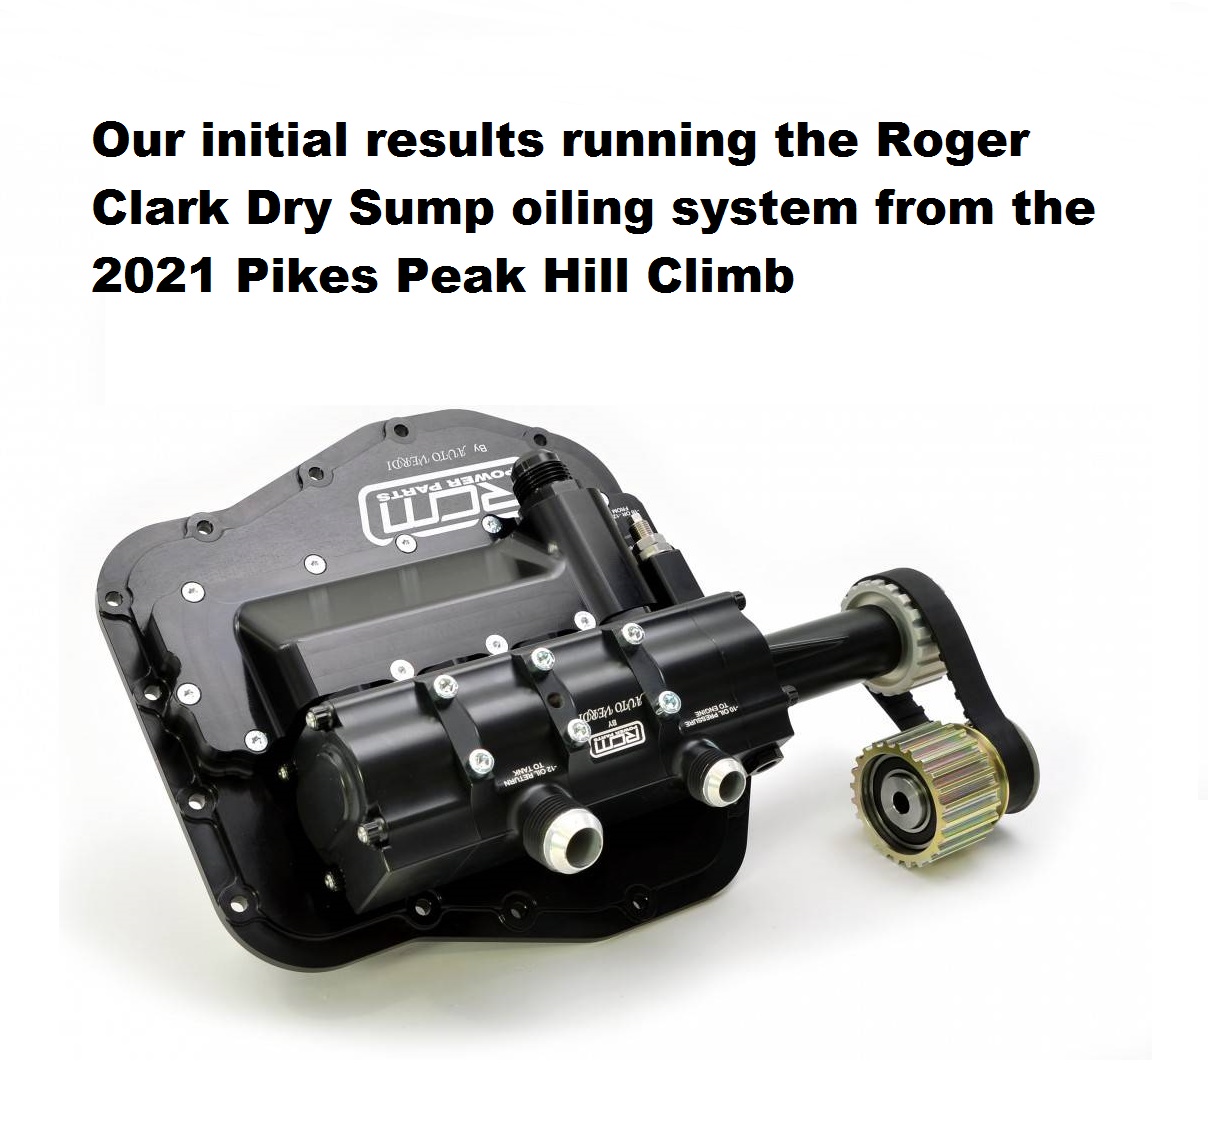 Link to our RCM Dry Sump Video